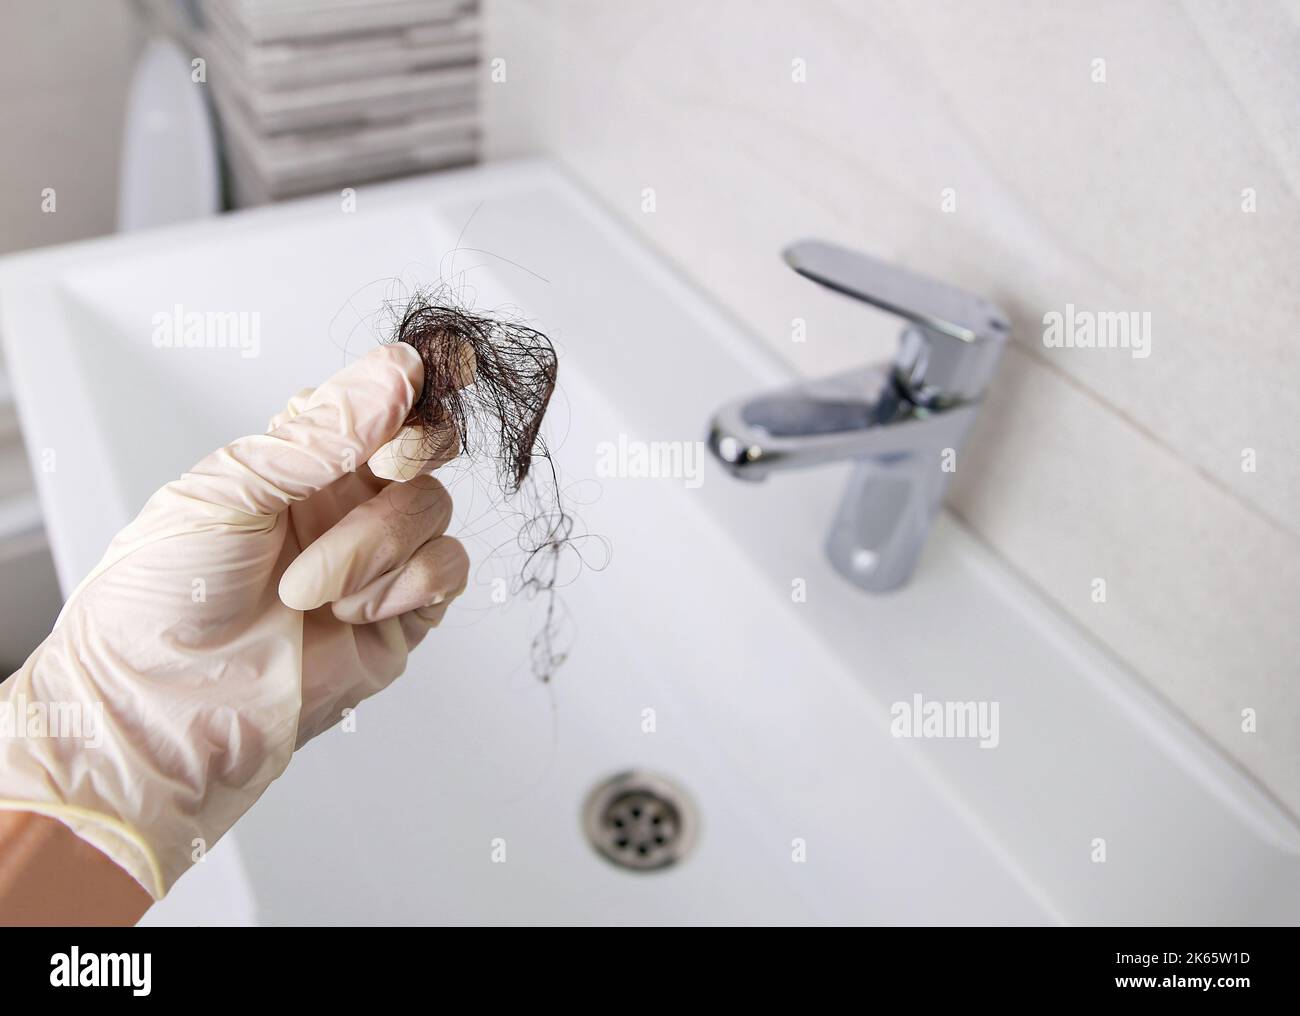 Lost hair in sink. A woman cleans the sink from garbage. Selective focus on the hand with hair. Stock Photo